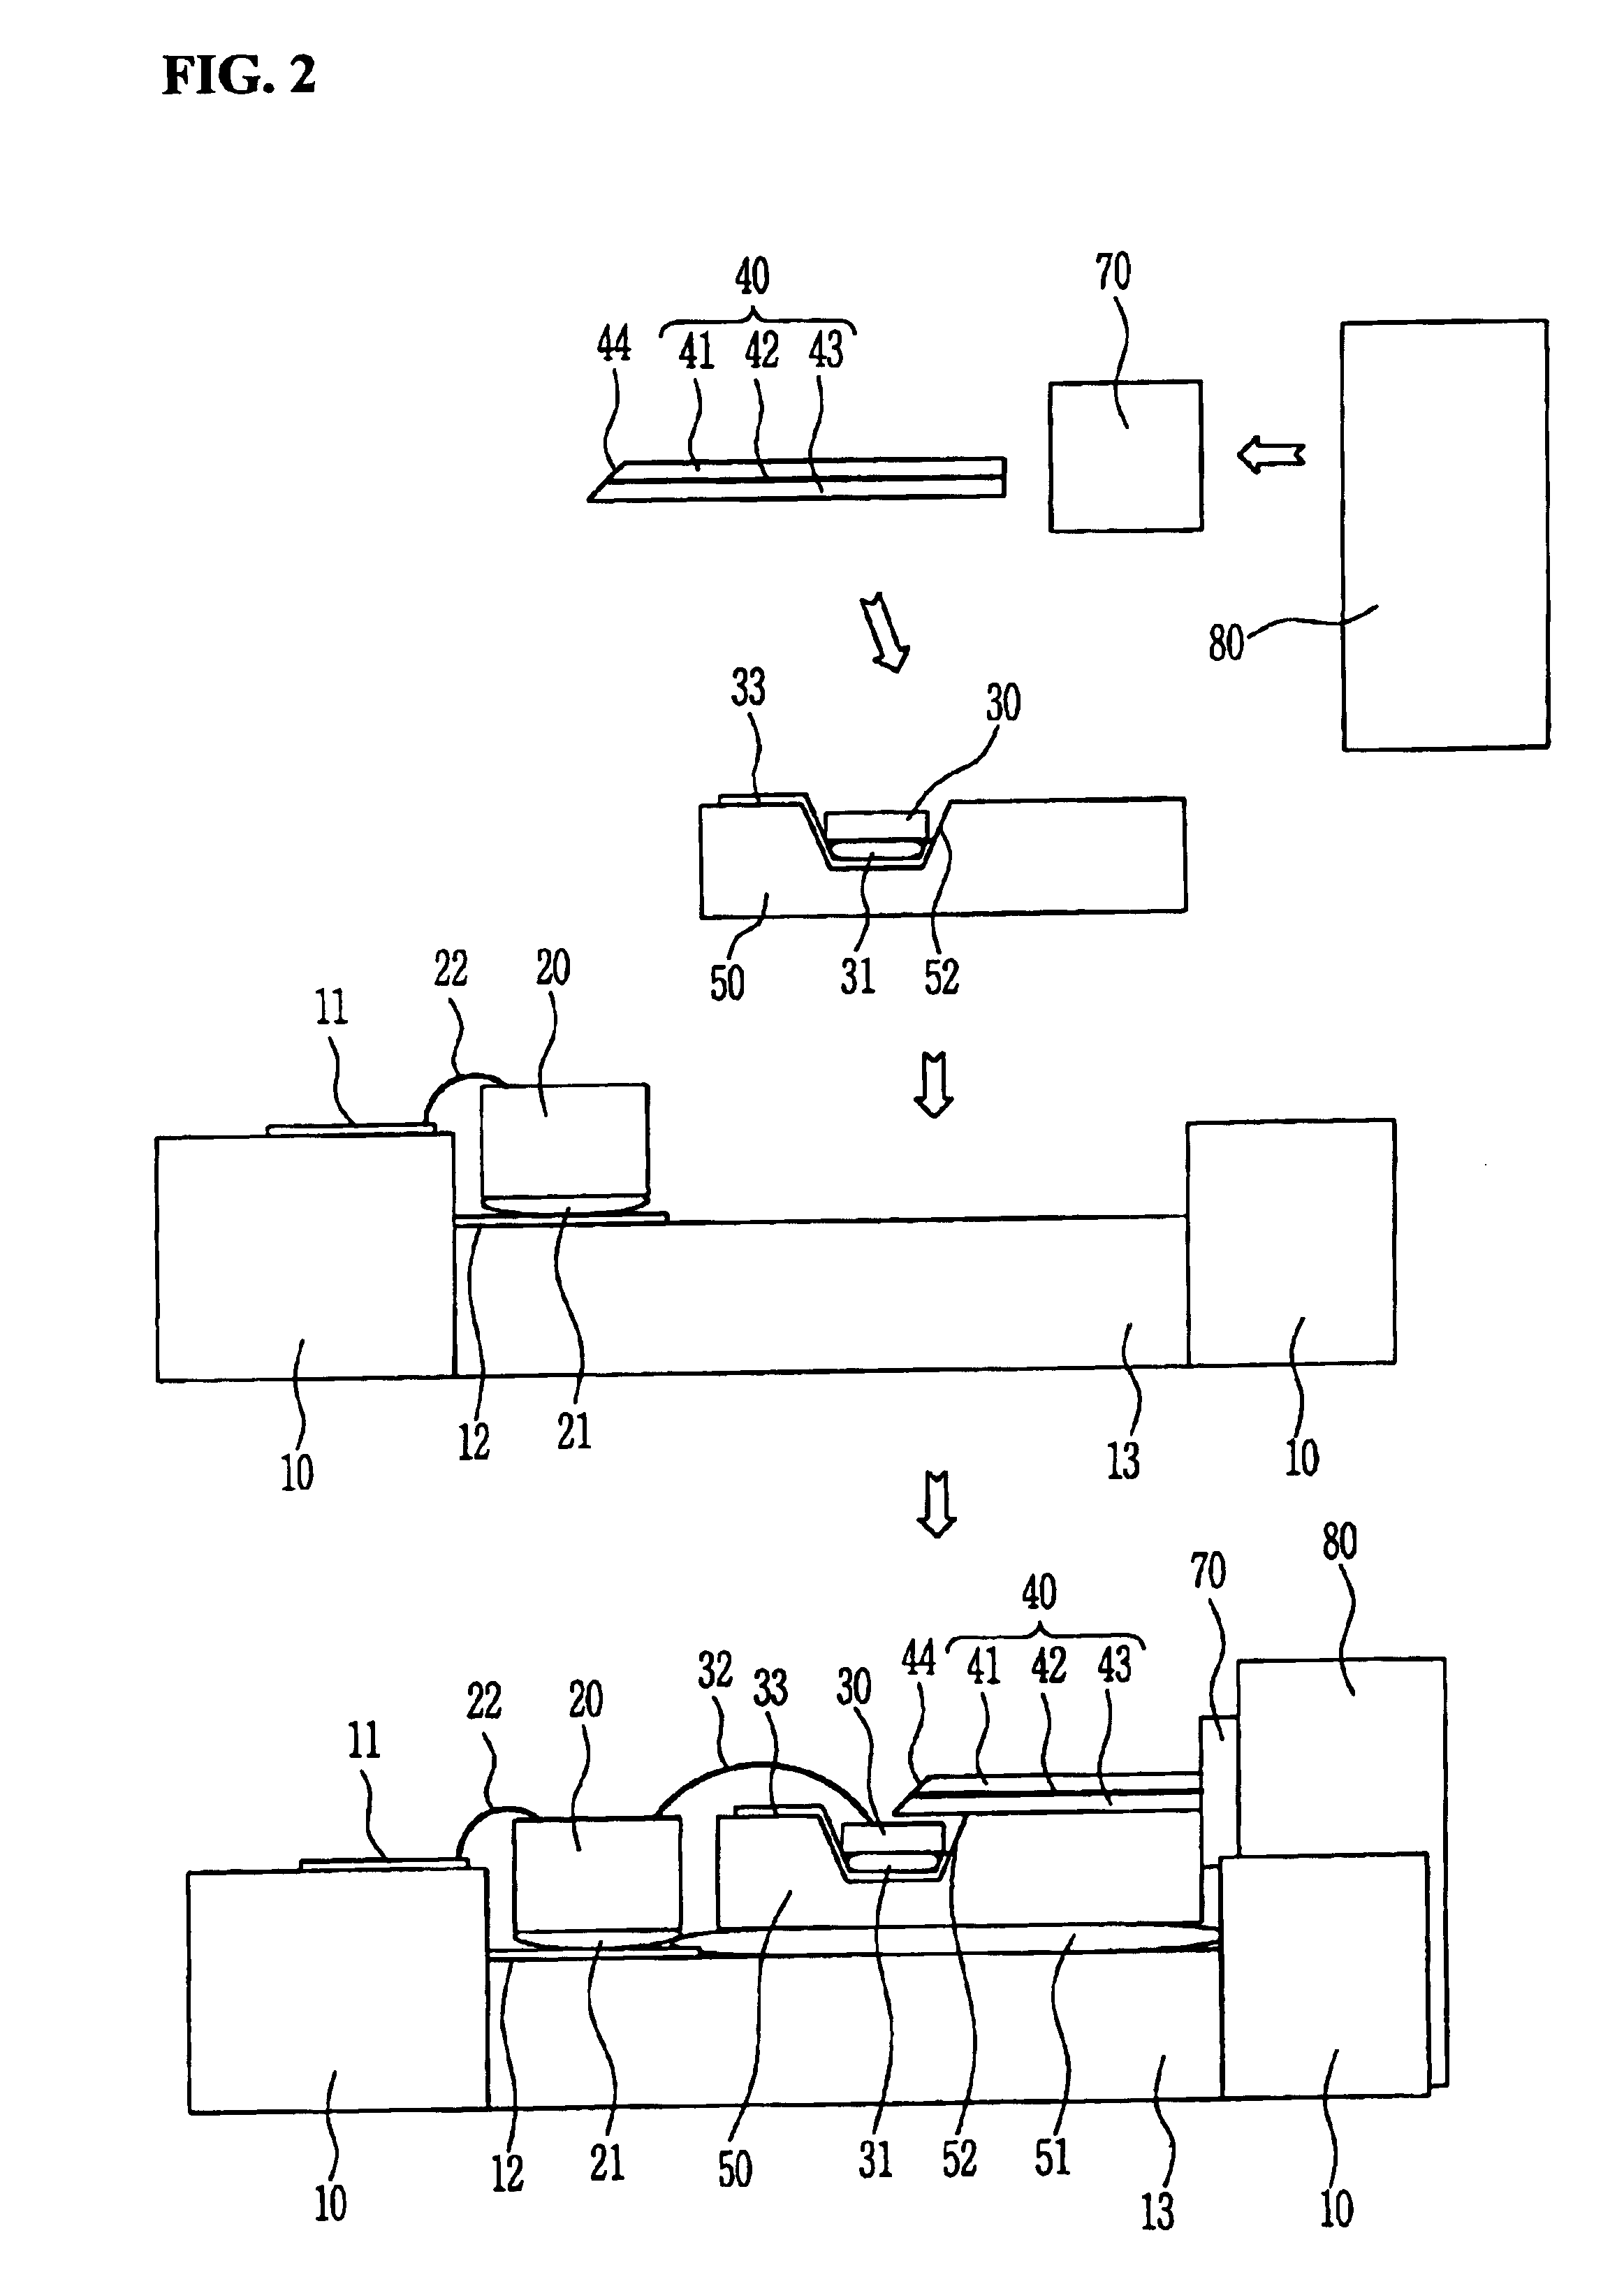 Parallel optical interconnection module and method for manufacturing the same